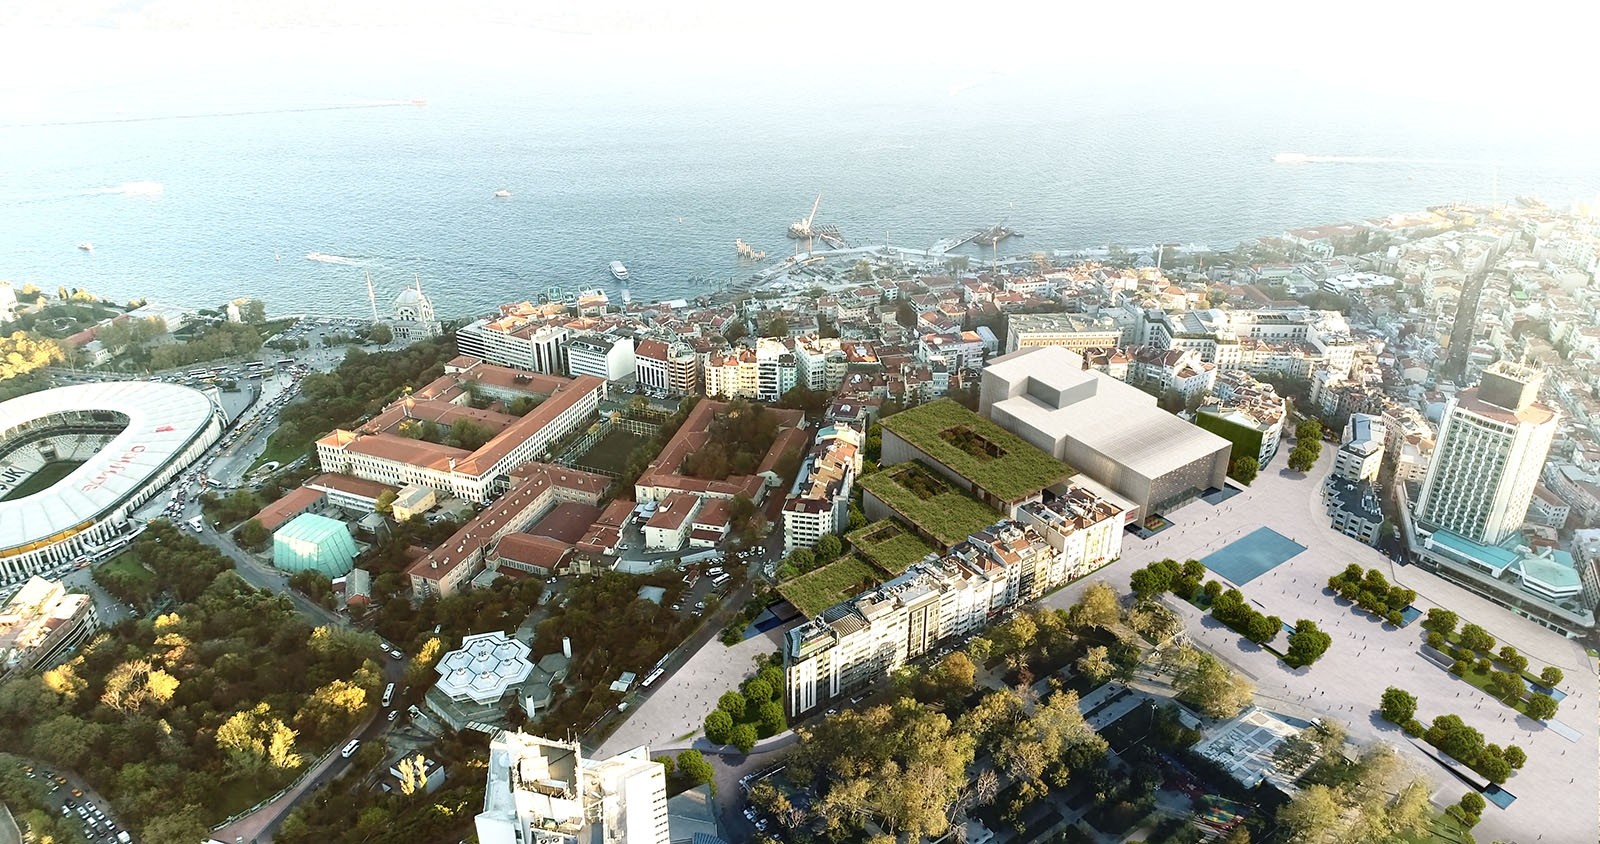 New Atatürk Cultural Center to be completed by 2019